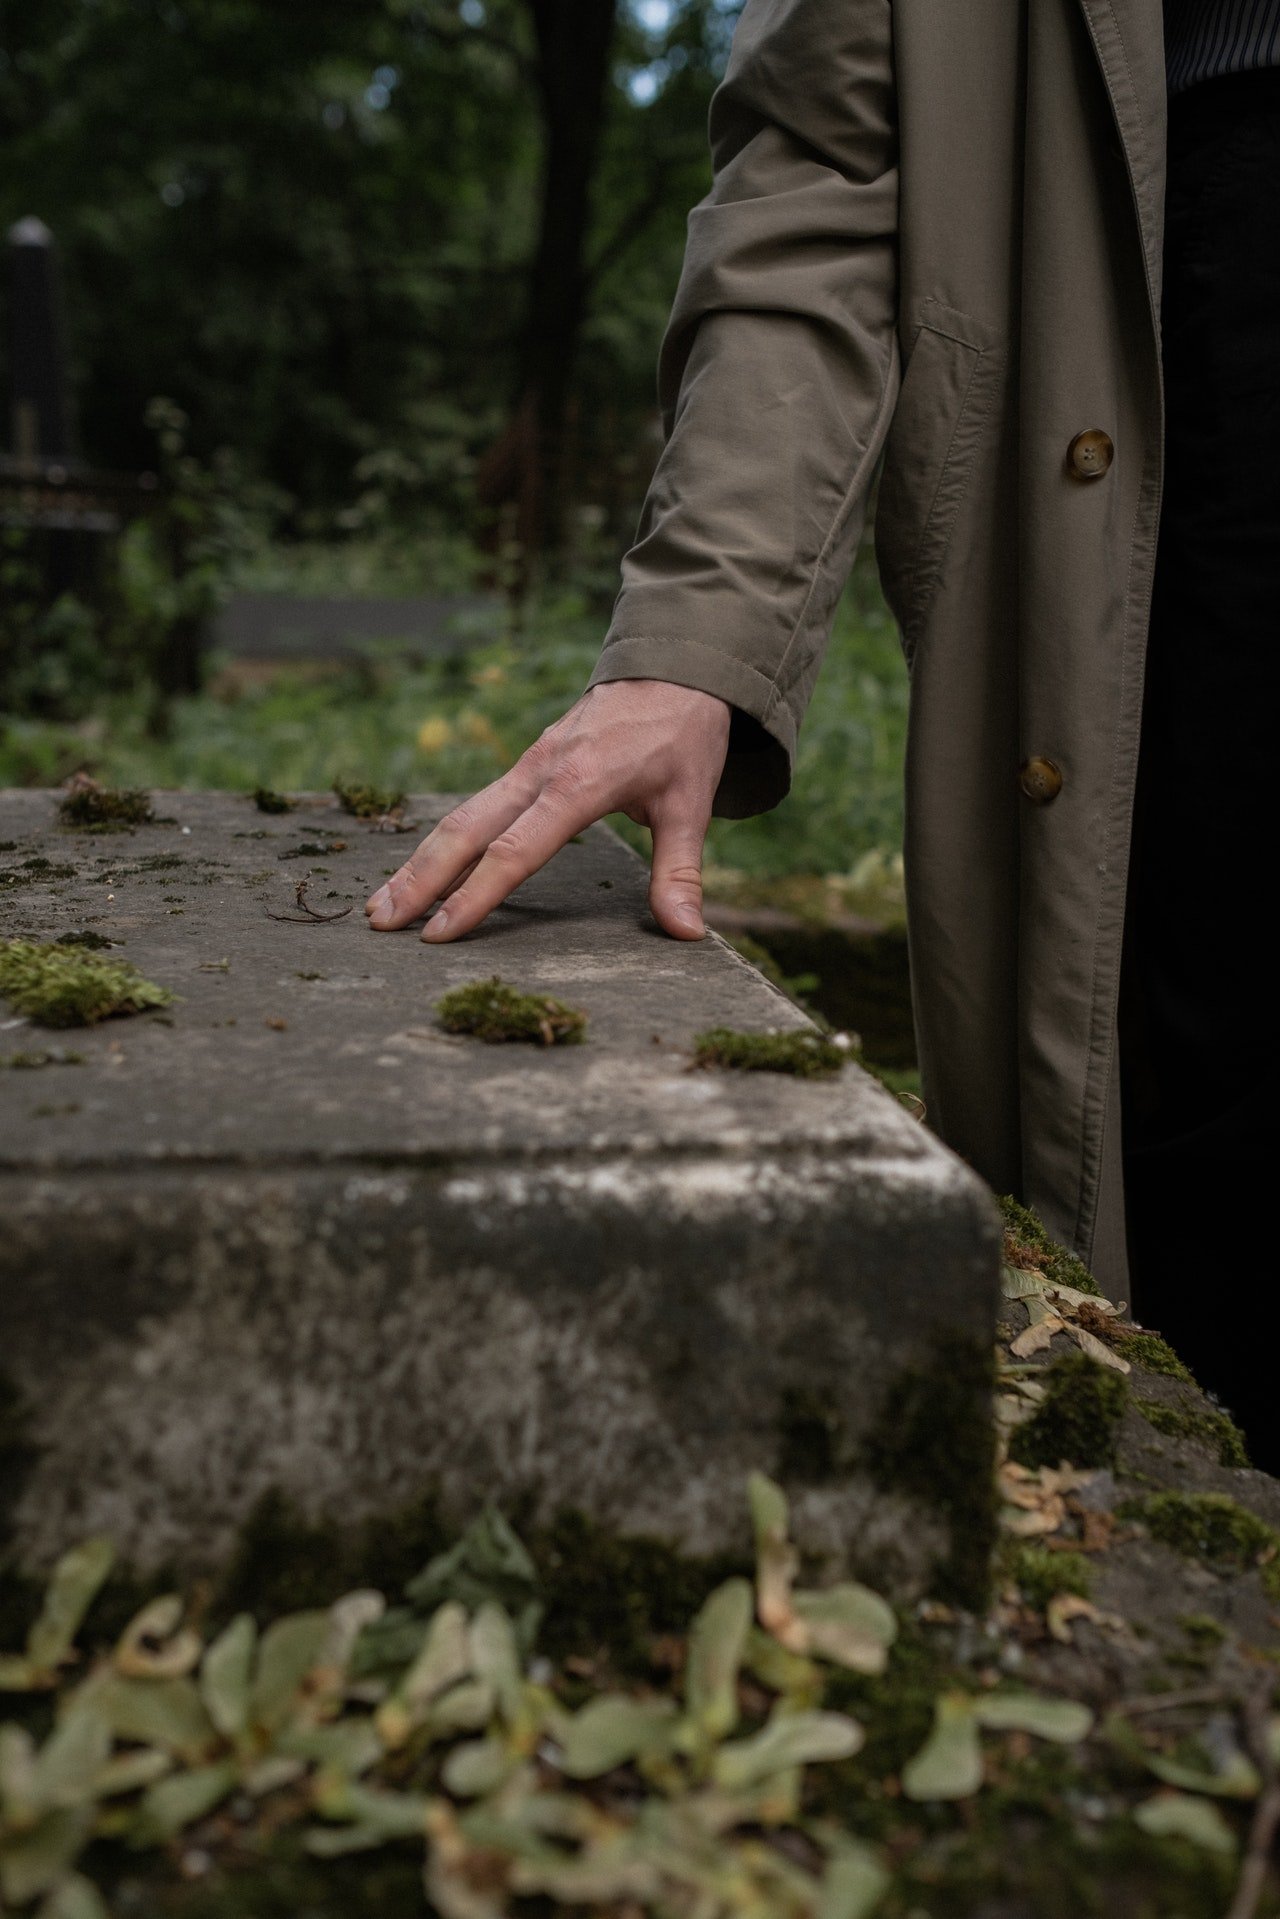 The brothers visited their mother's grave every year. | Source: Pexels